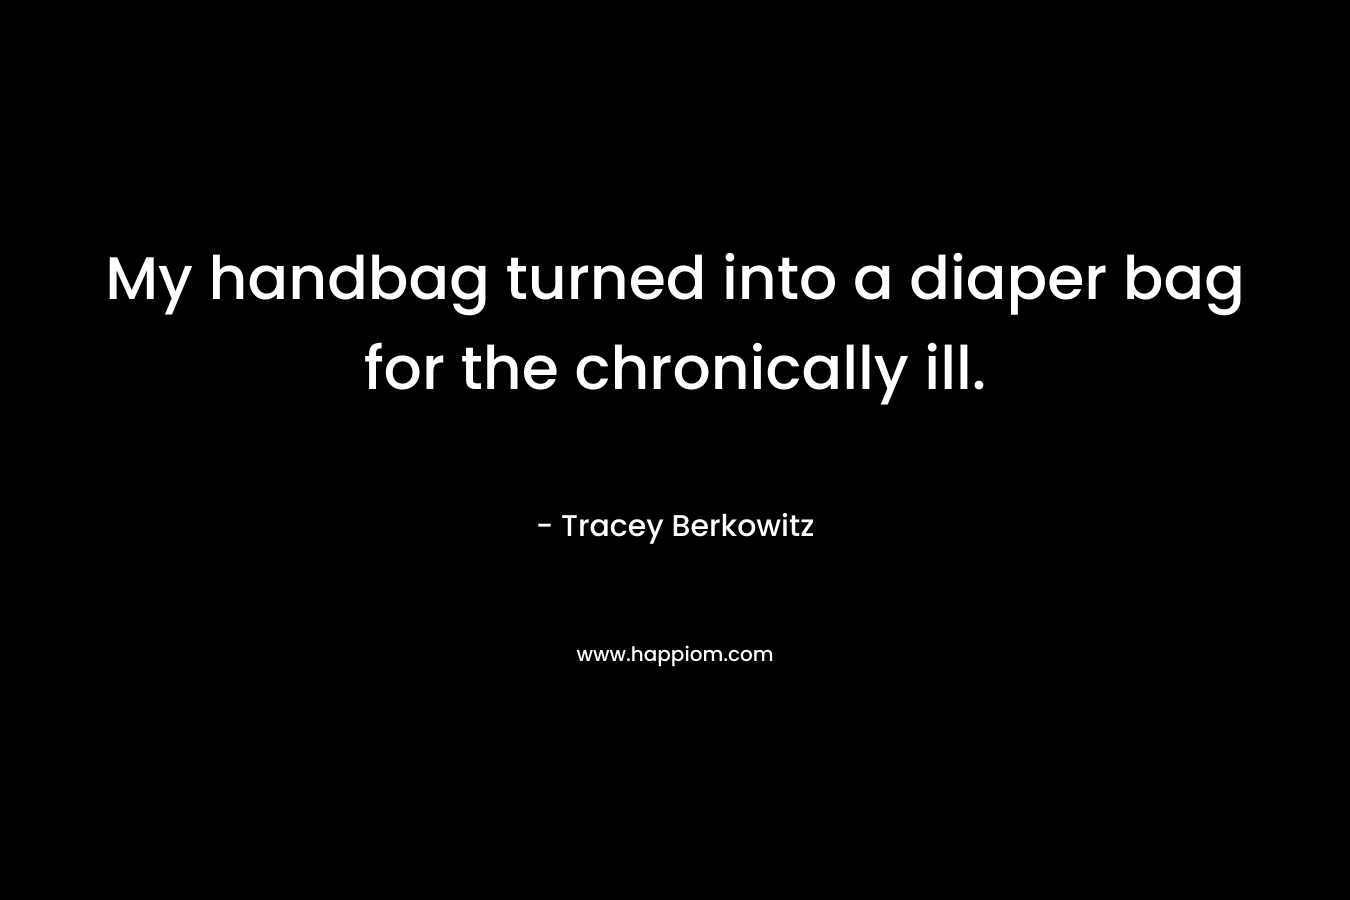 My handbag turned into a diaper bag for the chronically ill. – Tracey Berkowitz